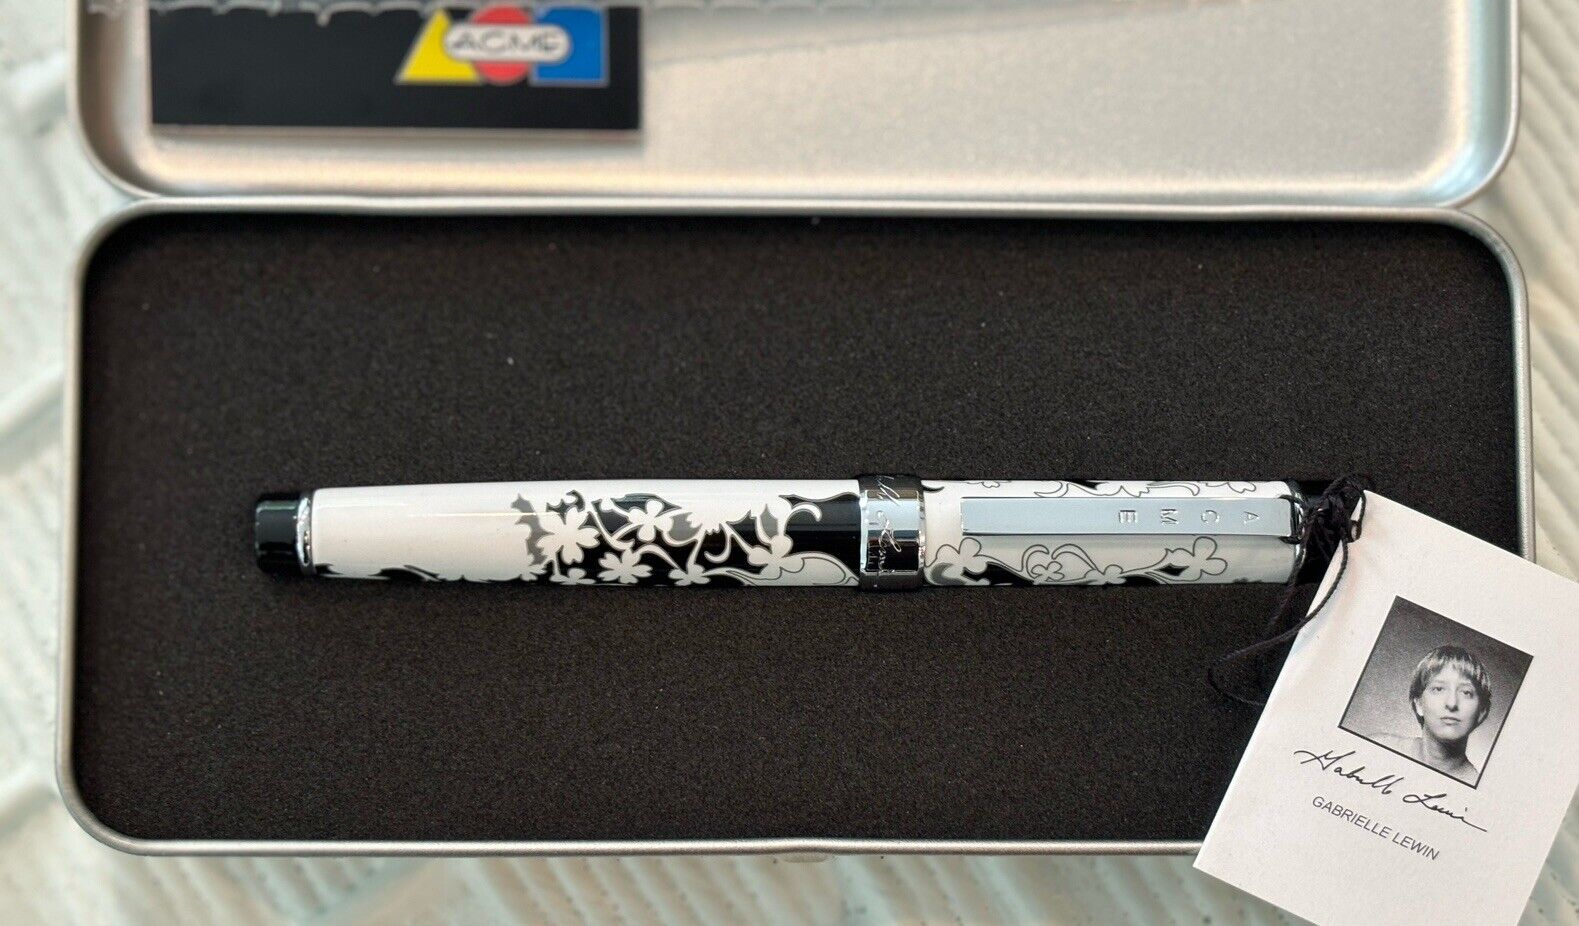 Archived Limited Edition Acme Rollerball “Petal” Pen Designed By Gabrielle Lewin